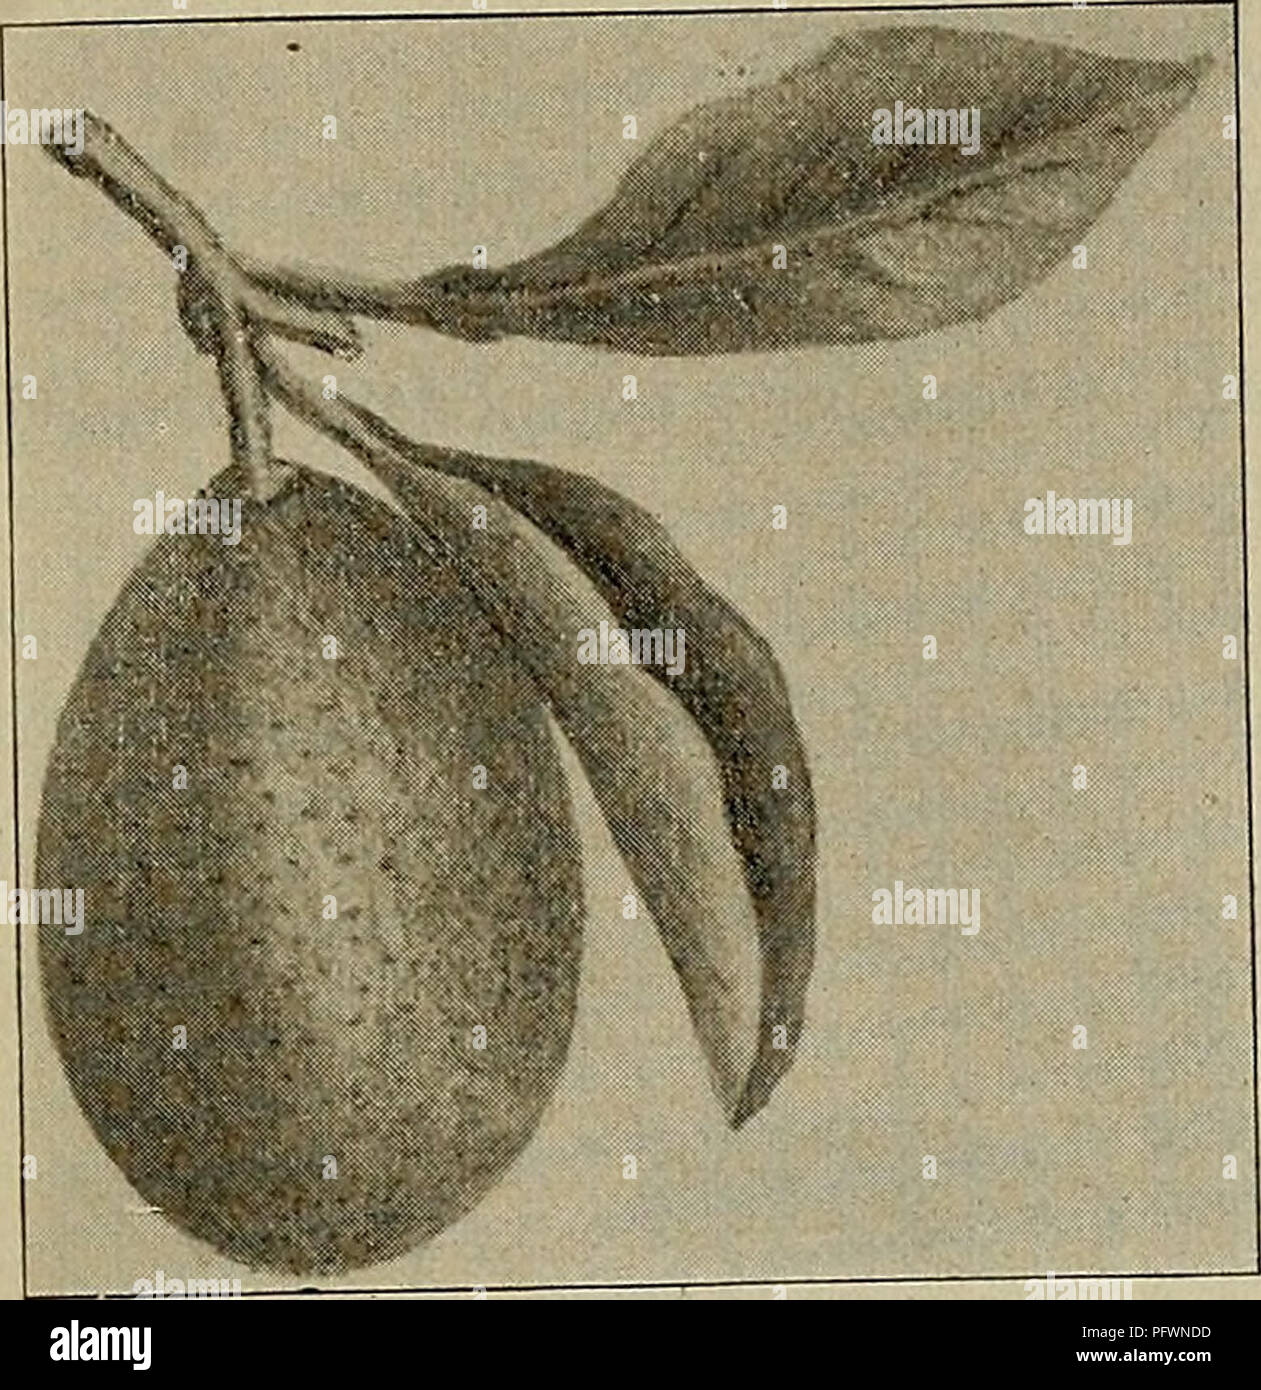 . Culture of the citrus in California. Citrus fruits; Fruit-culture. THE. ORANGE IN CALIFORNIA—VARIETIES. 69. Olive-Shaped Kumquat—natural size. Kumquat Type. Citrus aurantium, var. Japon- ica, Thunberg. Olive-Shaped.—Fruit very small,olive-shaped,rind thick, yellow, smooth, sweet scented, very little pulp, contains many seeds. Tree dwarf (a bush), four to six feet; a very prolific bearer. The fruit is edible whole; the rind has a pleas- ant aroma. Valuable for pre- serves and marmalades.. Please note that these images are extracted from scanned page images that may have been digitally enhance Stock Photo